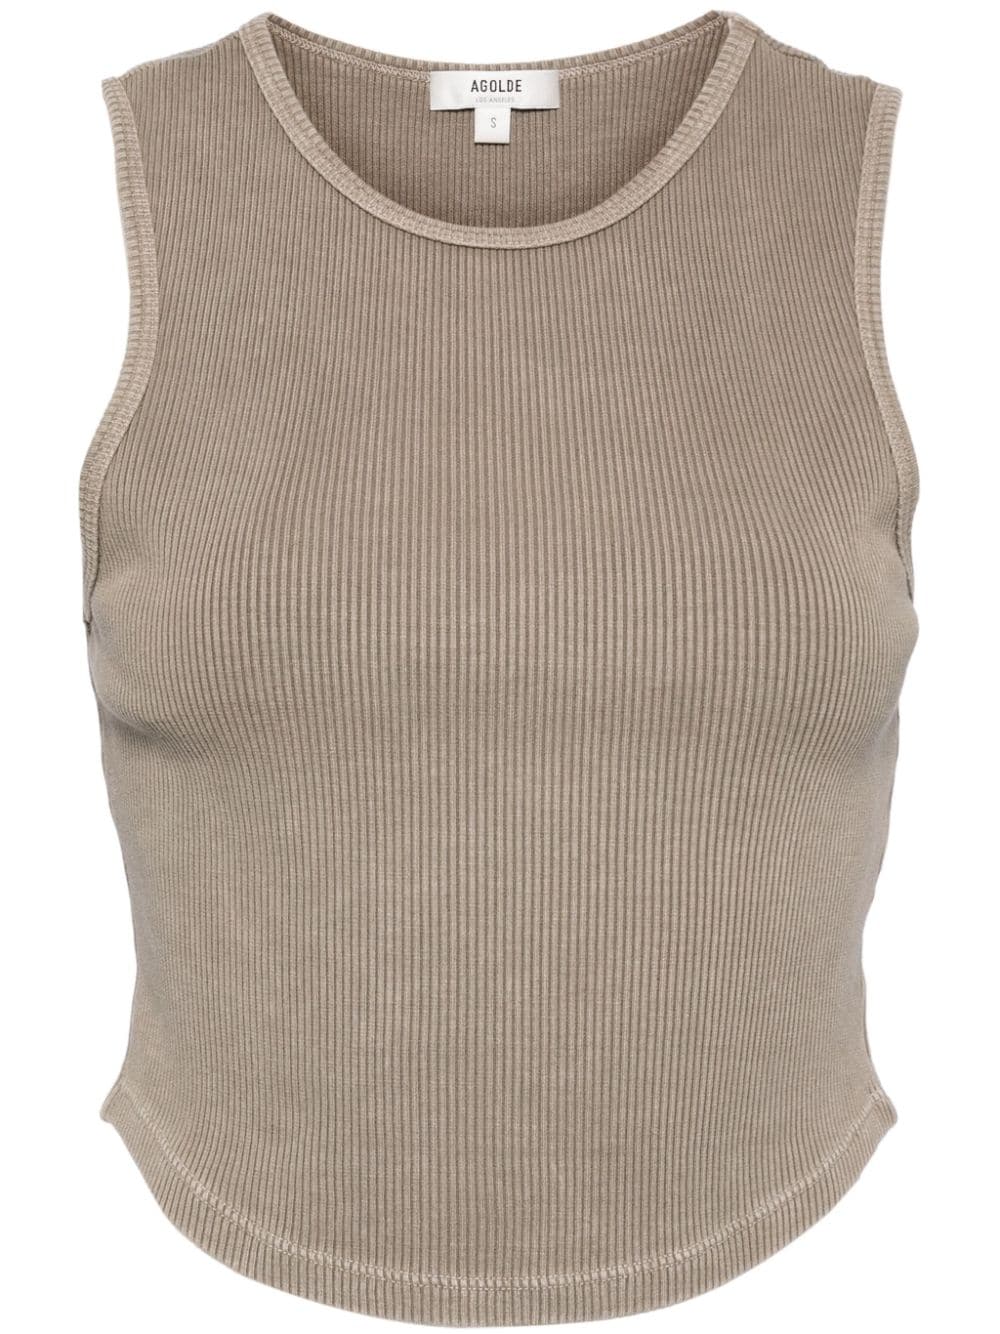 AGOLDE ribbed-knit tank top - Neutrals von AGOLDE